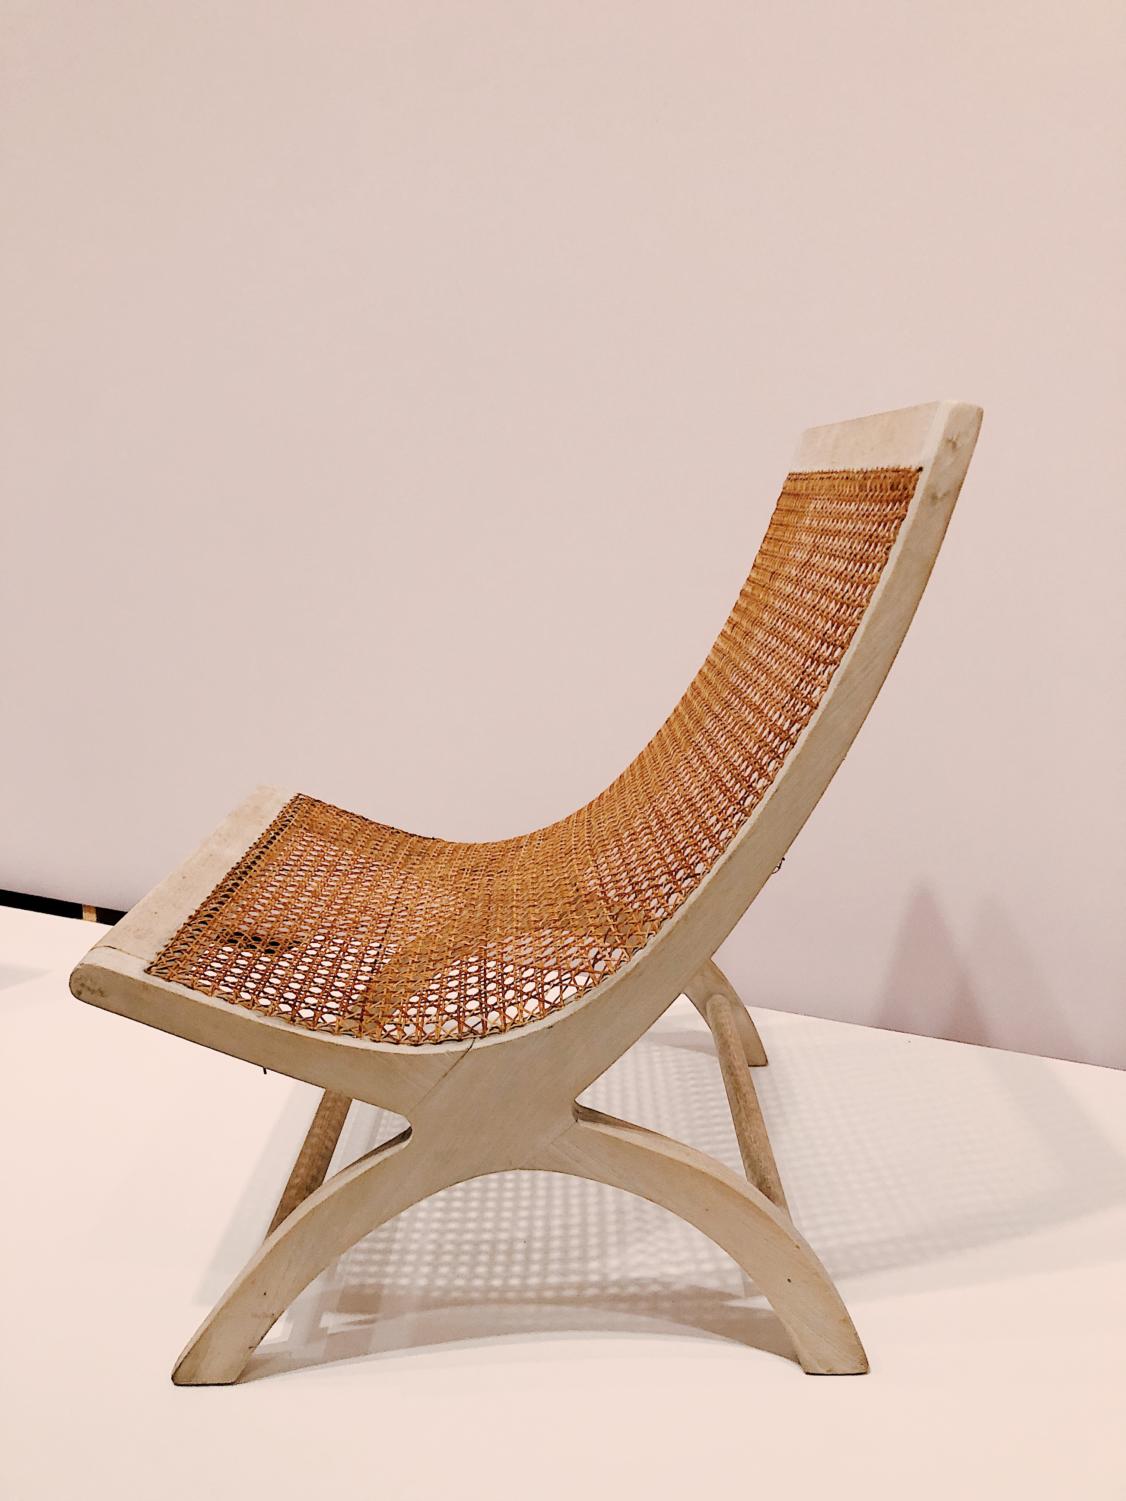 Clara Porset's Butaque chair, on display at the Art Institute of Chicago.